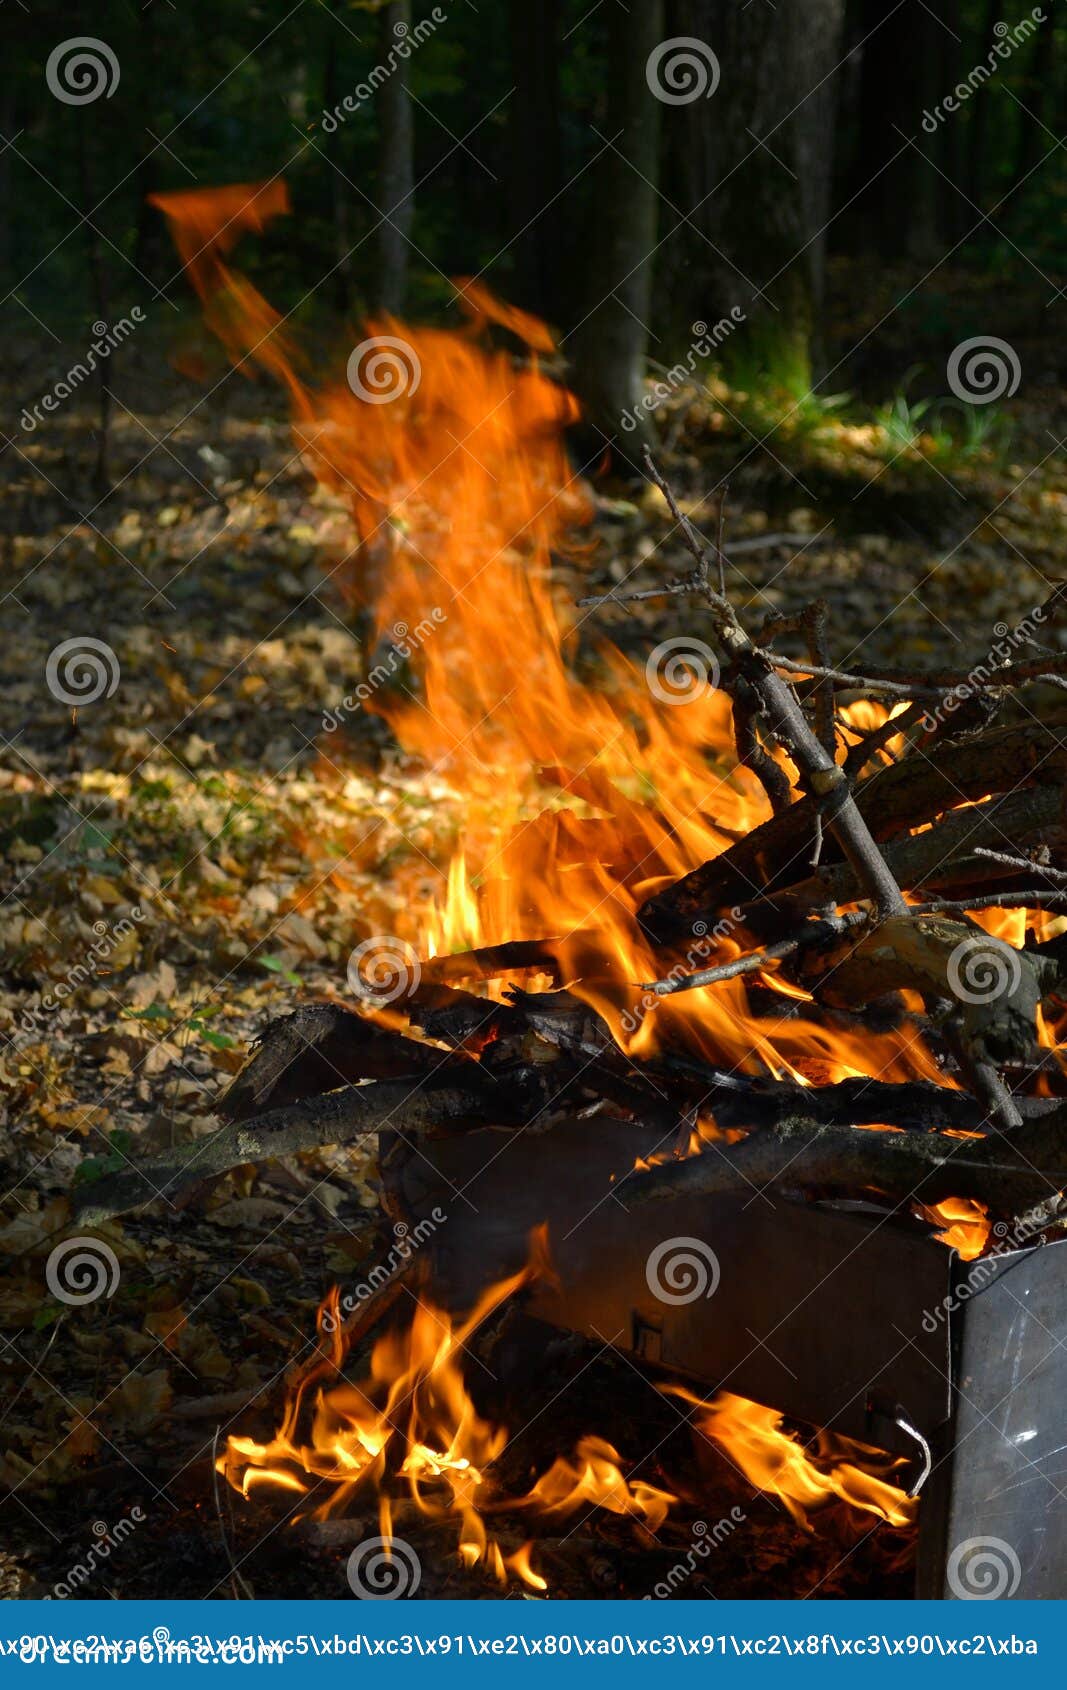 the fire burns in the woods